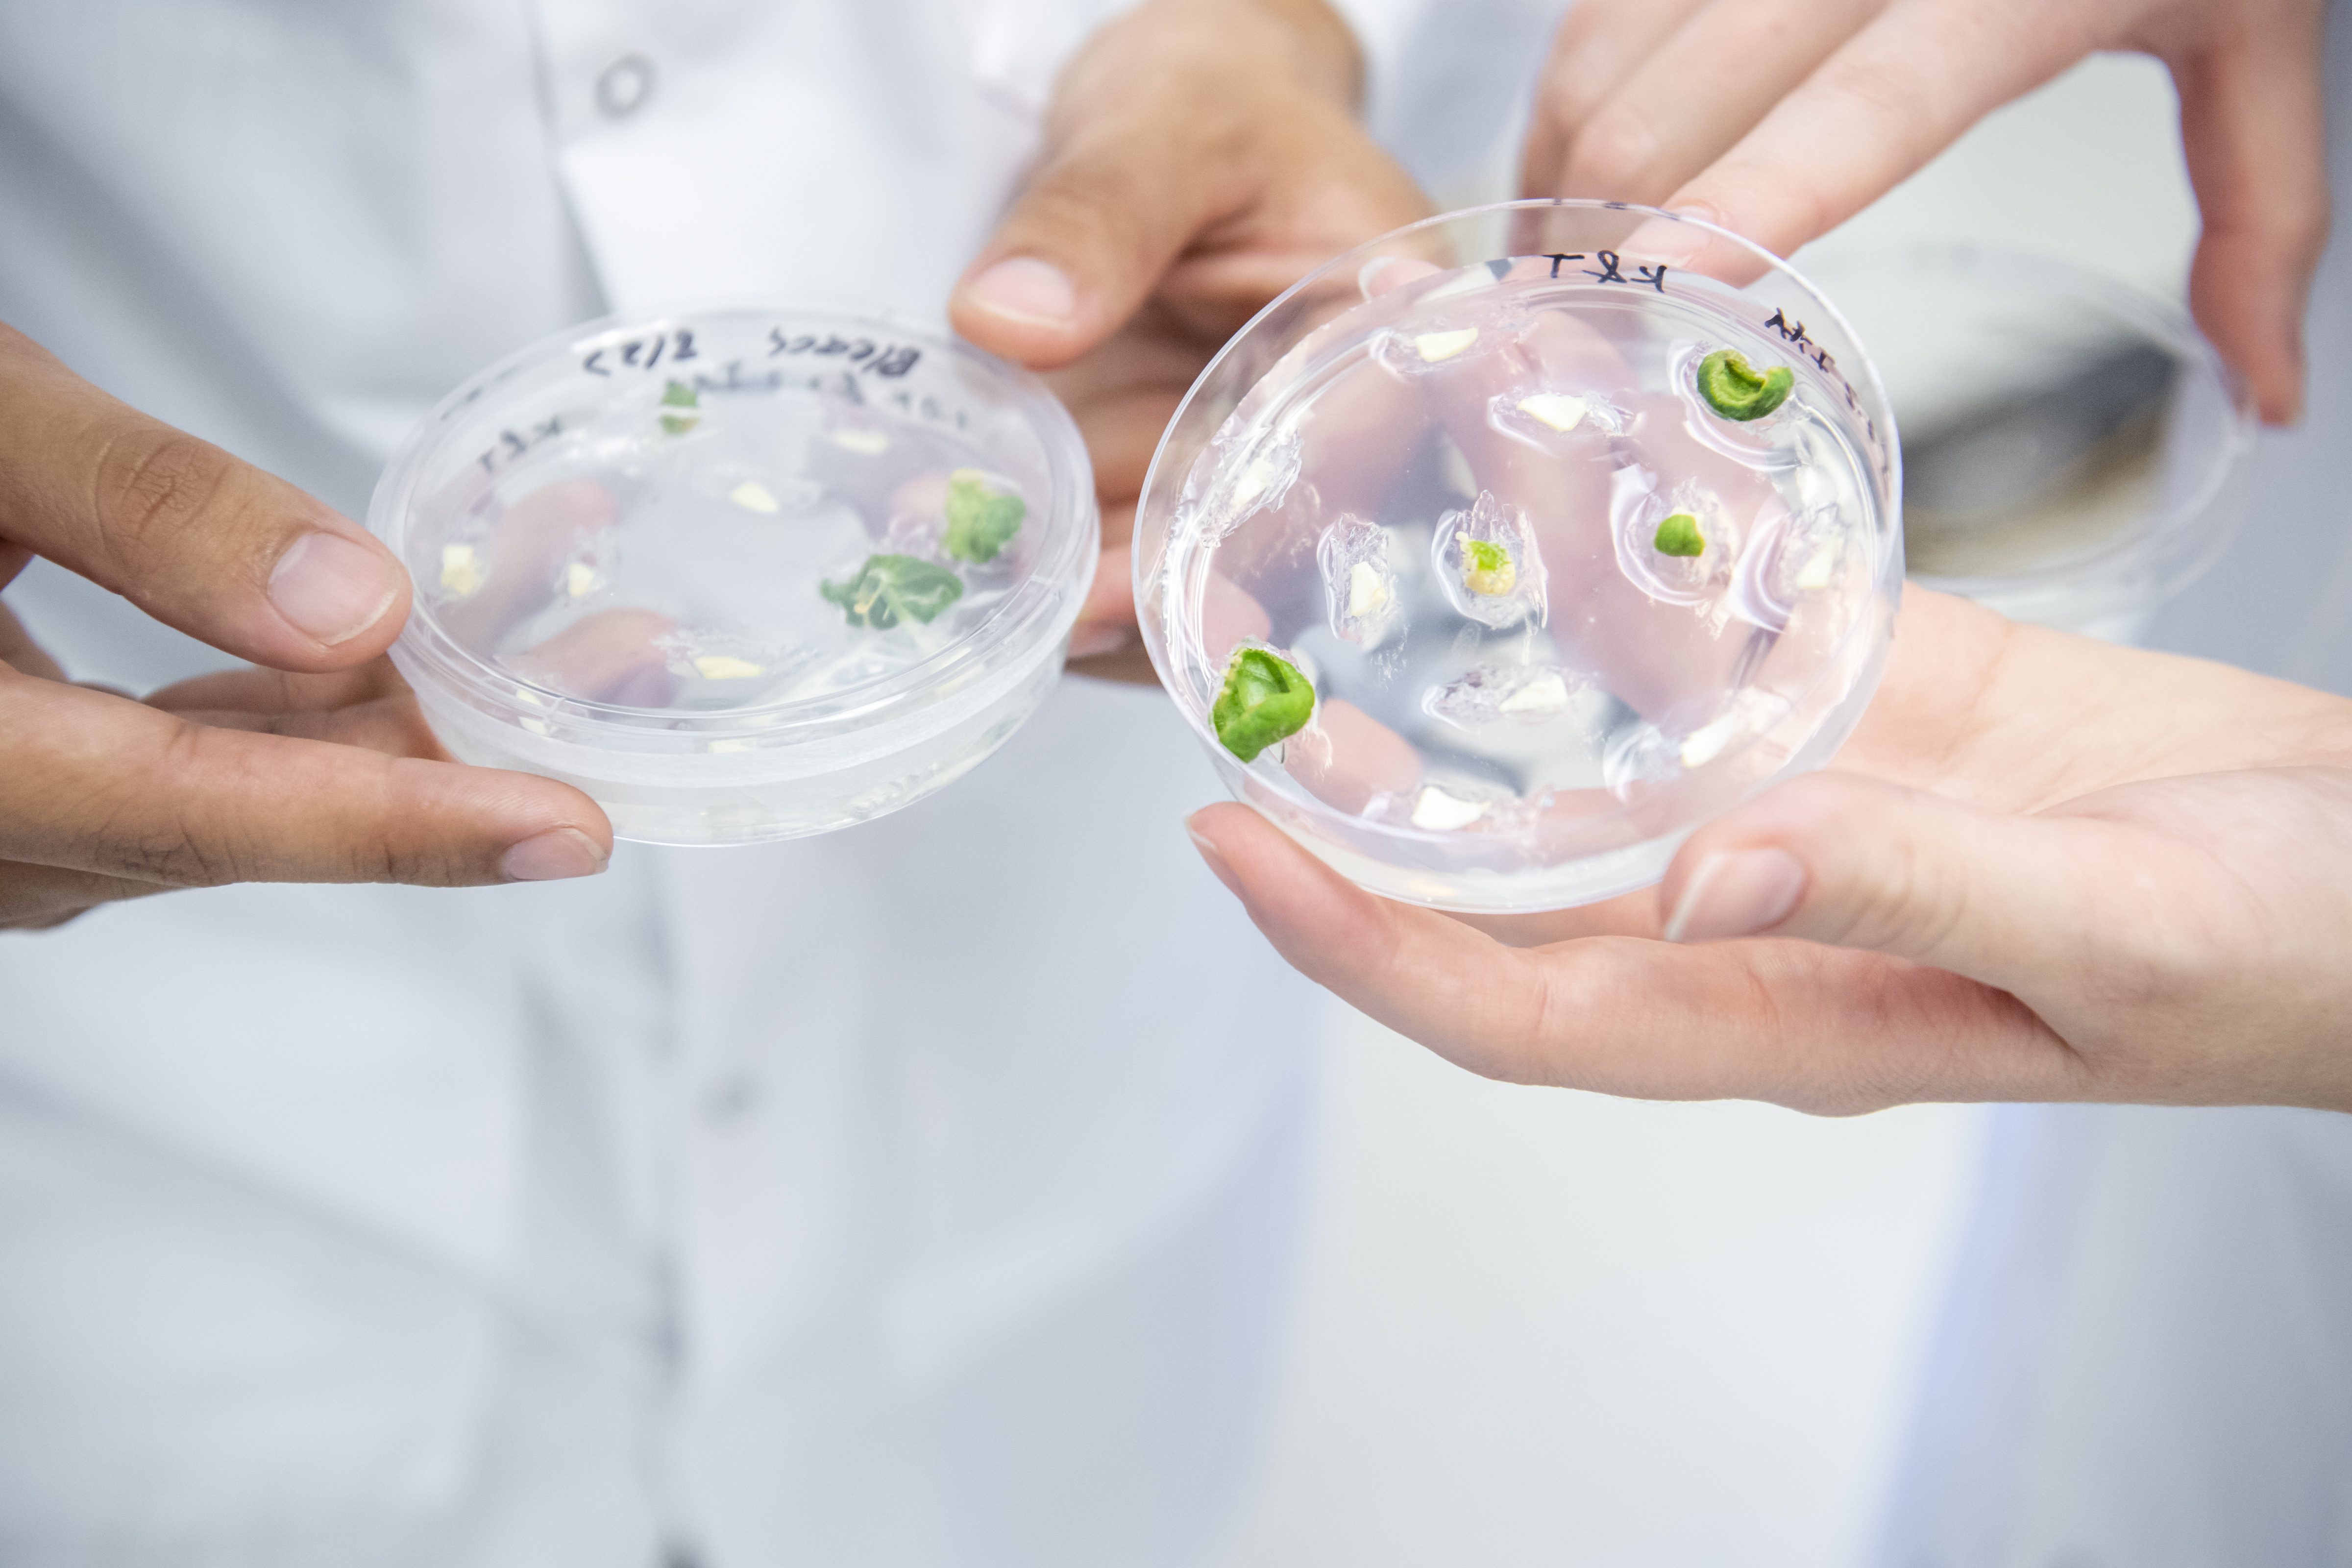 Hands holding petri dishes with seeds and mold